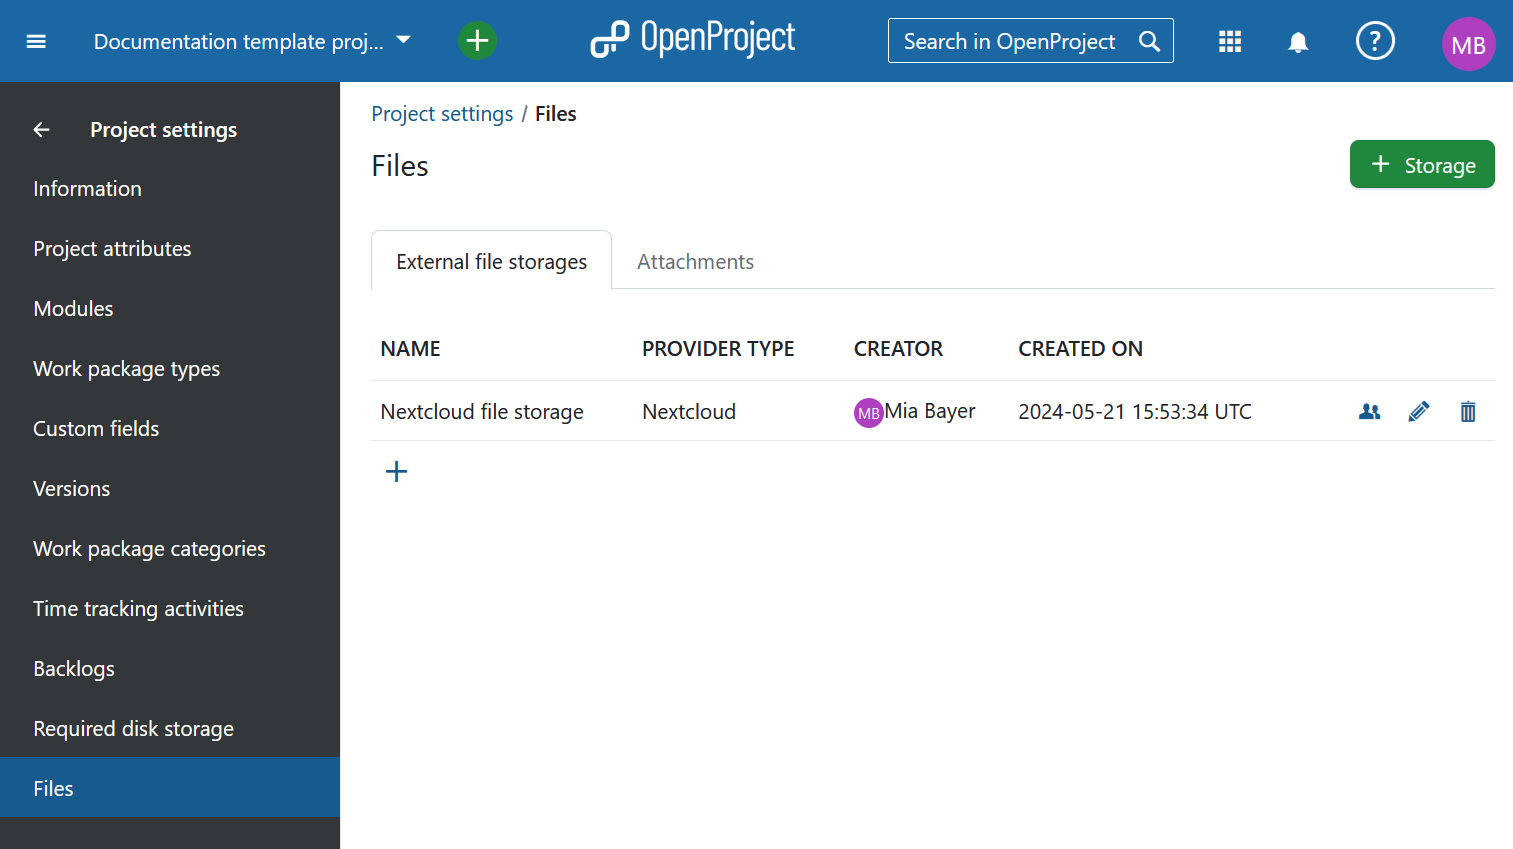 External file storages under project settings in OpenProject